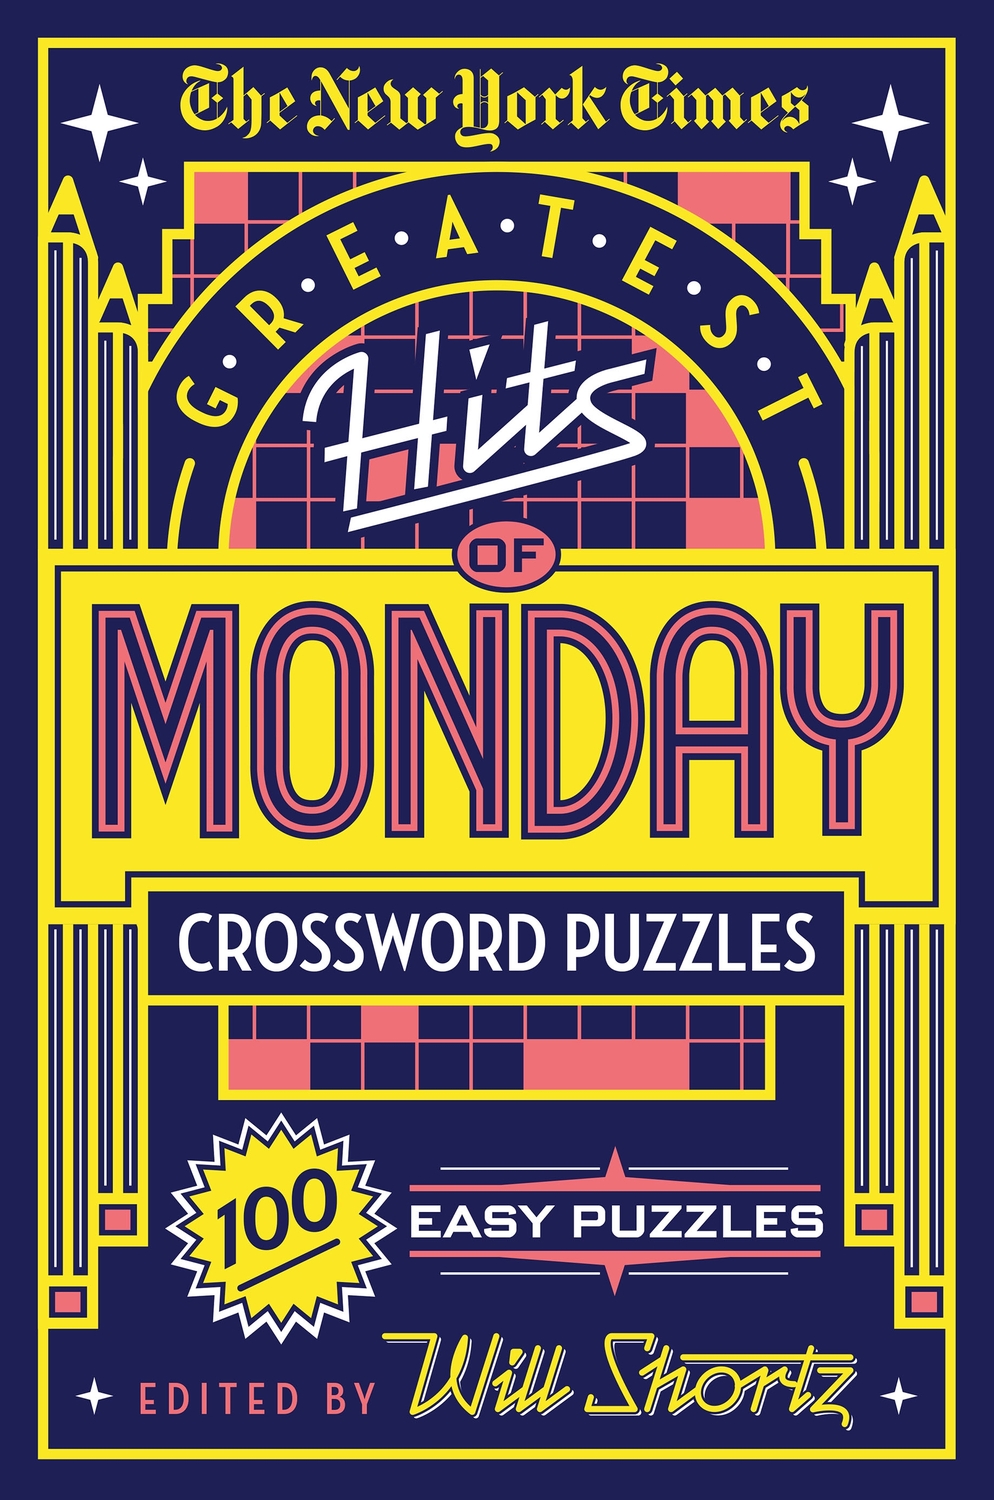 the-new-york-times-greatest-hits-of-monday-crossword-puzzles-100-easy-puzzles-eureka-puzzles